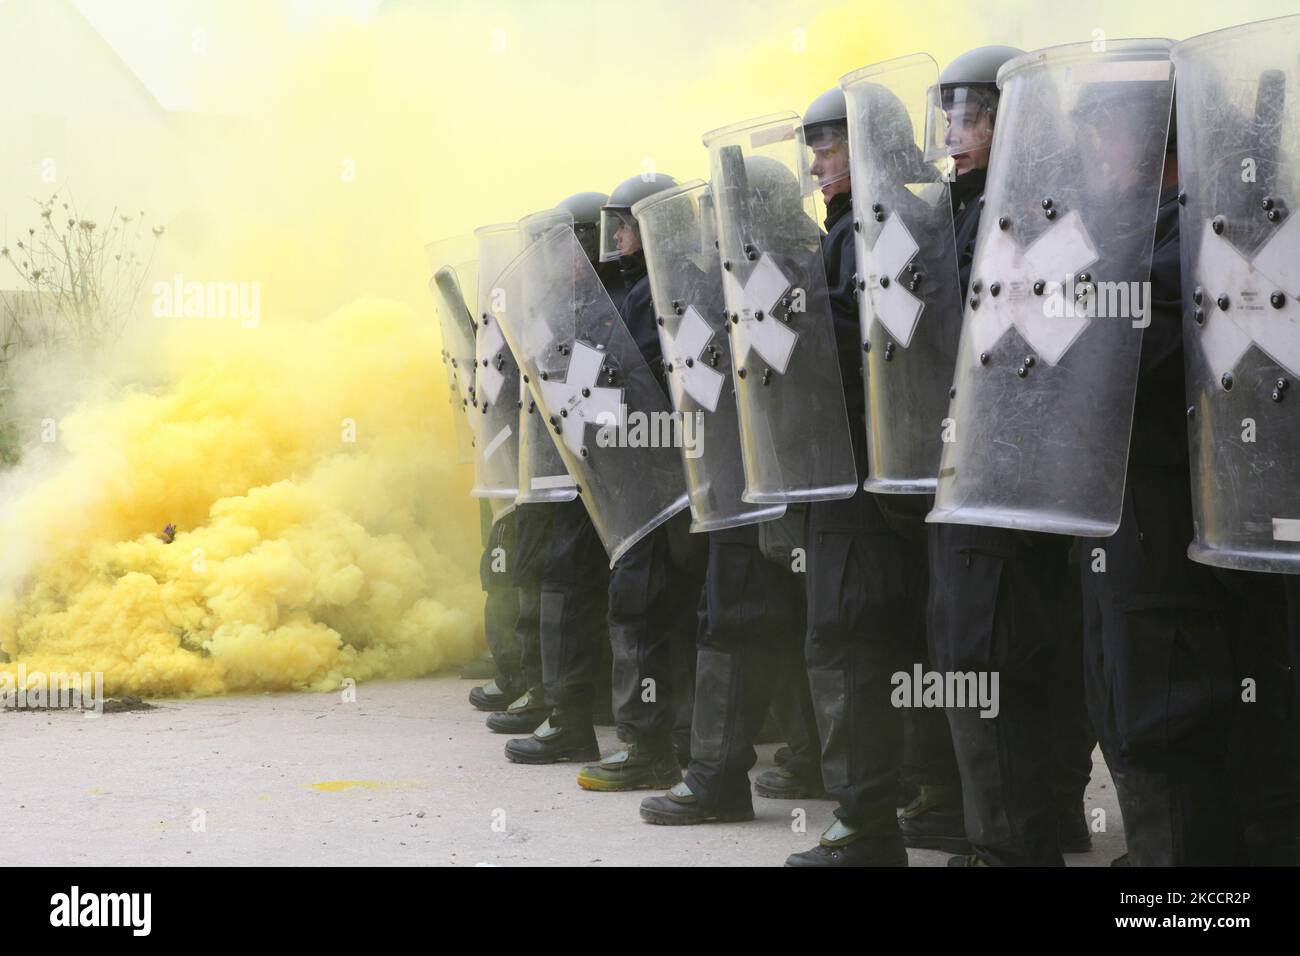 German soldiers form a crash line while conducting riot control training. Stock Photo